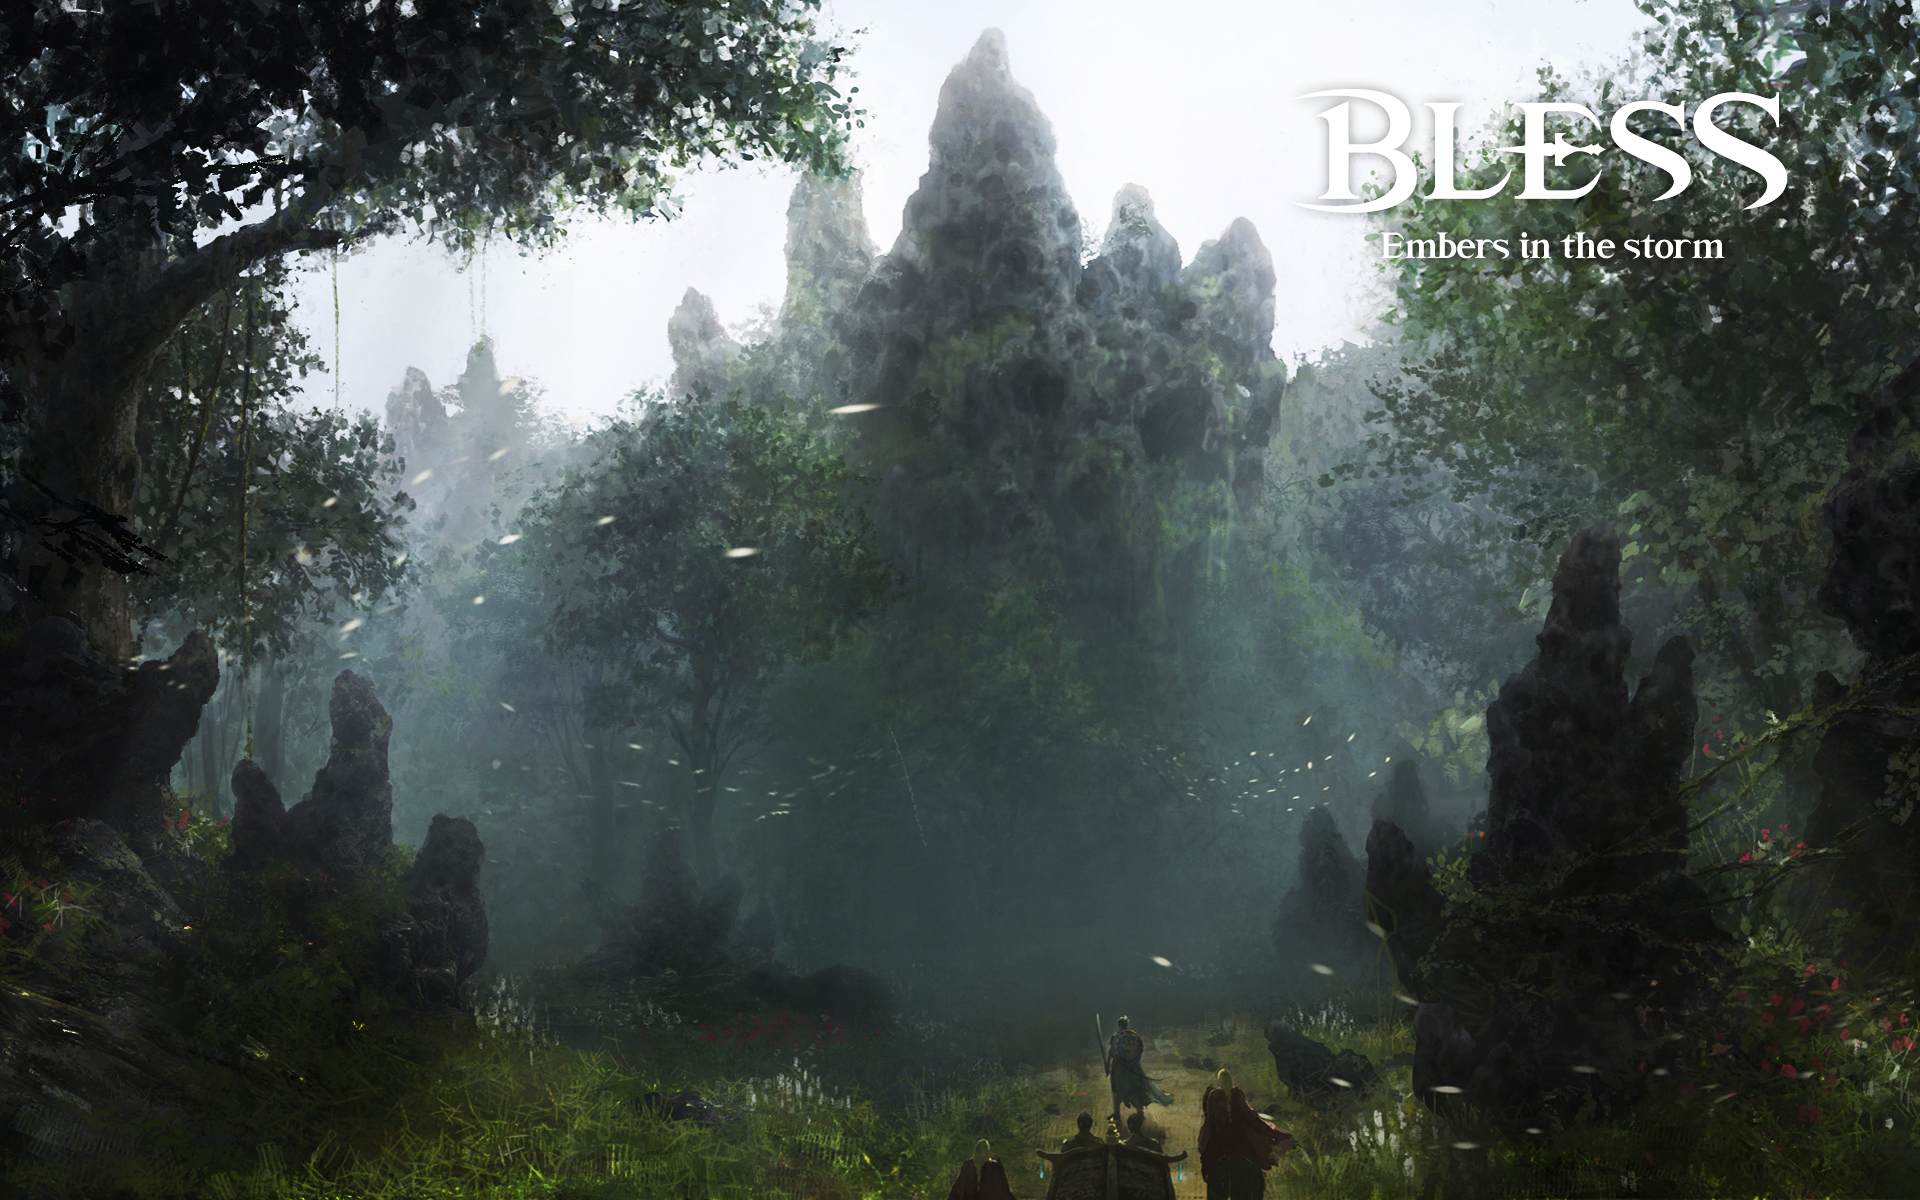 Video Game Bless Online HD Wallpaper | Background Image